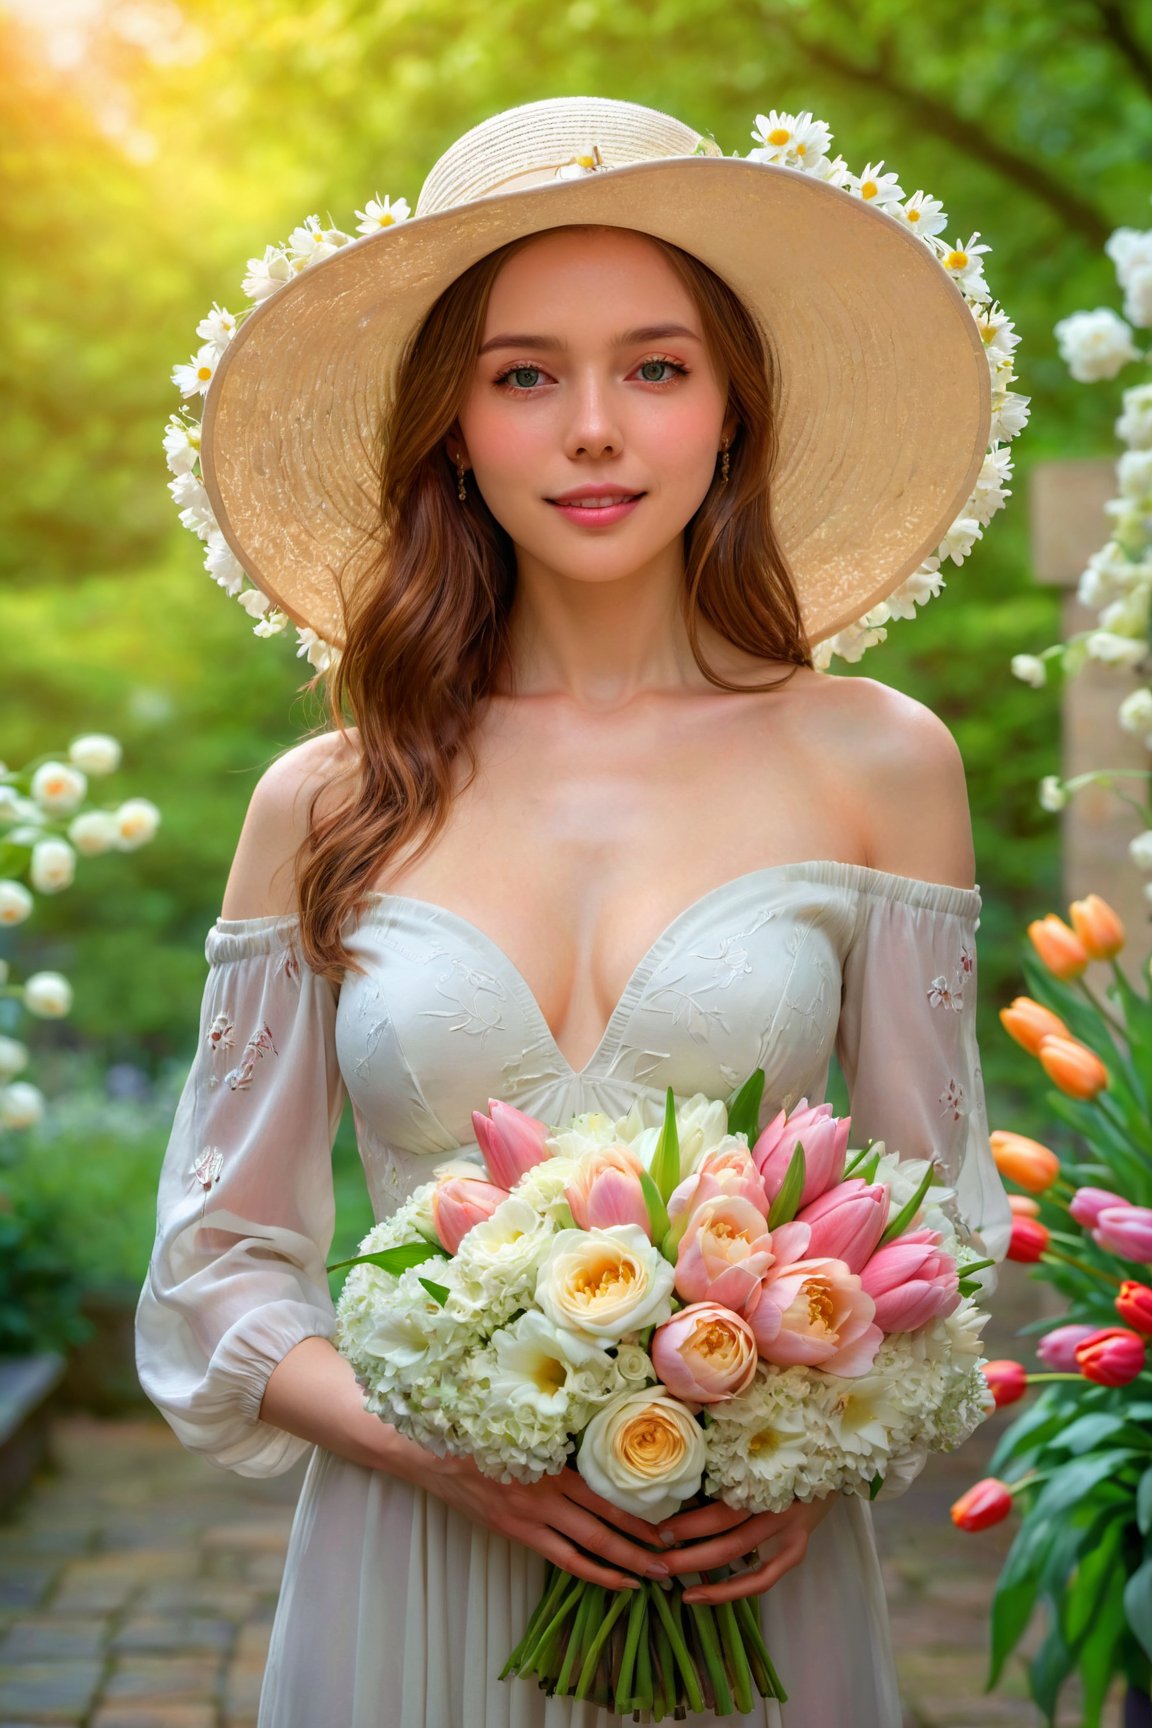 (best quality,4k,8k,highres,masterpiece:1.2),ultra-detailed,(realistic,photorealistic,photo-realistic:1.37),medium:oil painting,1girl,colorful flowers,garden setting,natural lighting,blooming flowers,green foliage,beautiful detailed eyes,beautiful detailed lips,natural makeup,gently smiling face,brown wavy hair,floral patterned hat,delicate hands with long fingers,flowing elegant dress,holding a meticulously arranged bouquet of various flowers,freshly picked roses,tulips,lilies,peonies,daisies,hydrangeas,exquisite details on each flower petals,soft and vibrant colors,subtle shadows and highlights,gentle breeze caressing the flowers,full of life and energy,charming and confident expression,a bee hovering around the bouquet,classical and elegant atmosphere,more detail XL